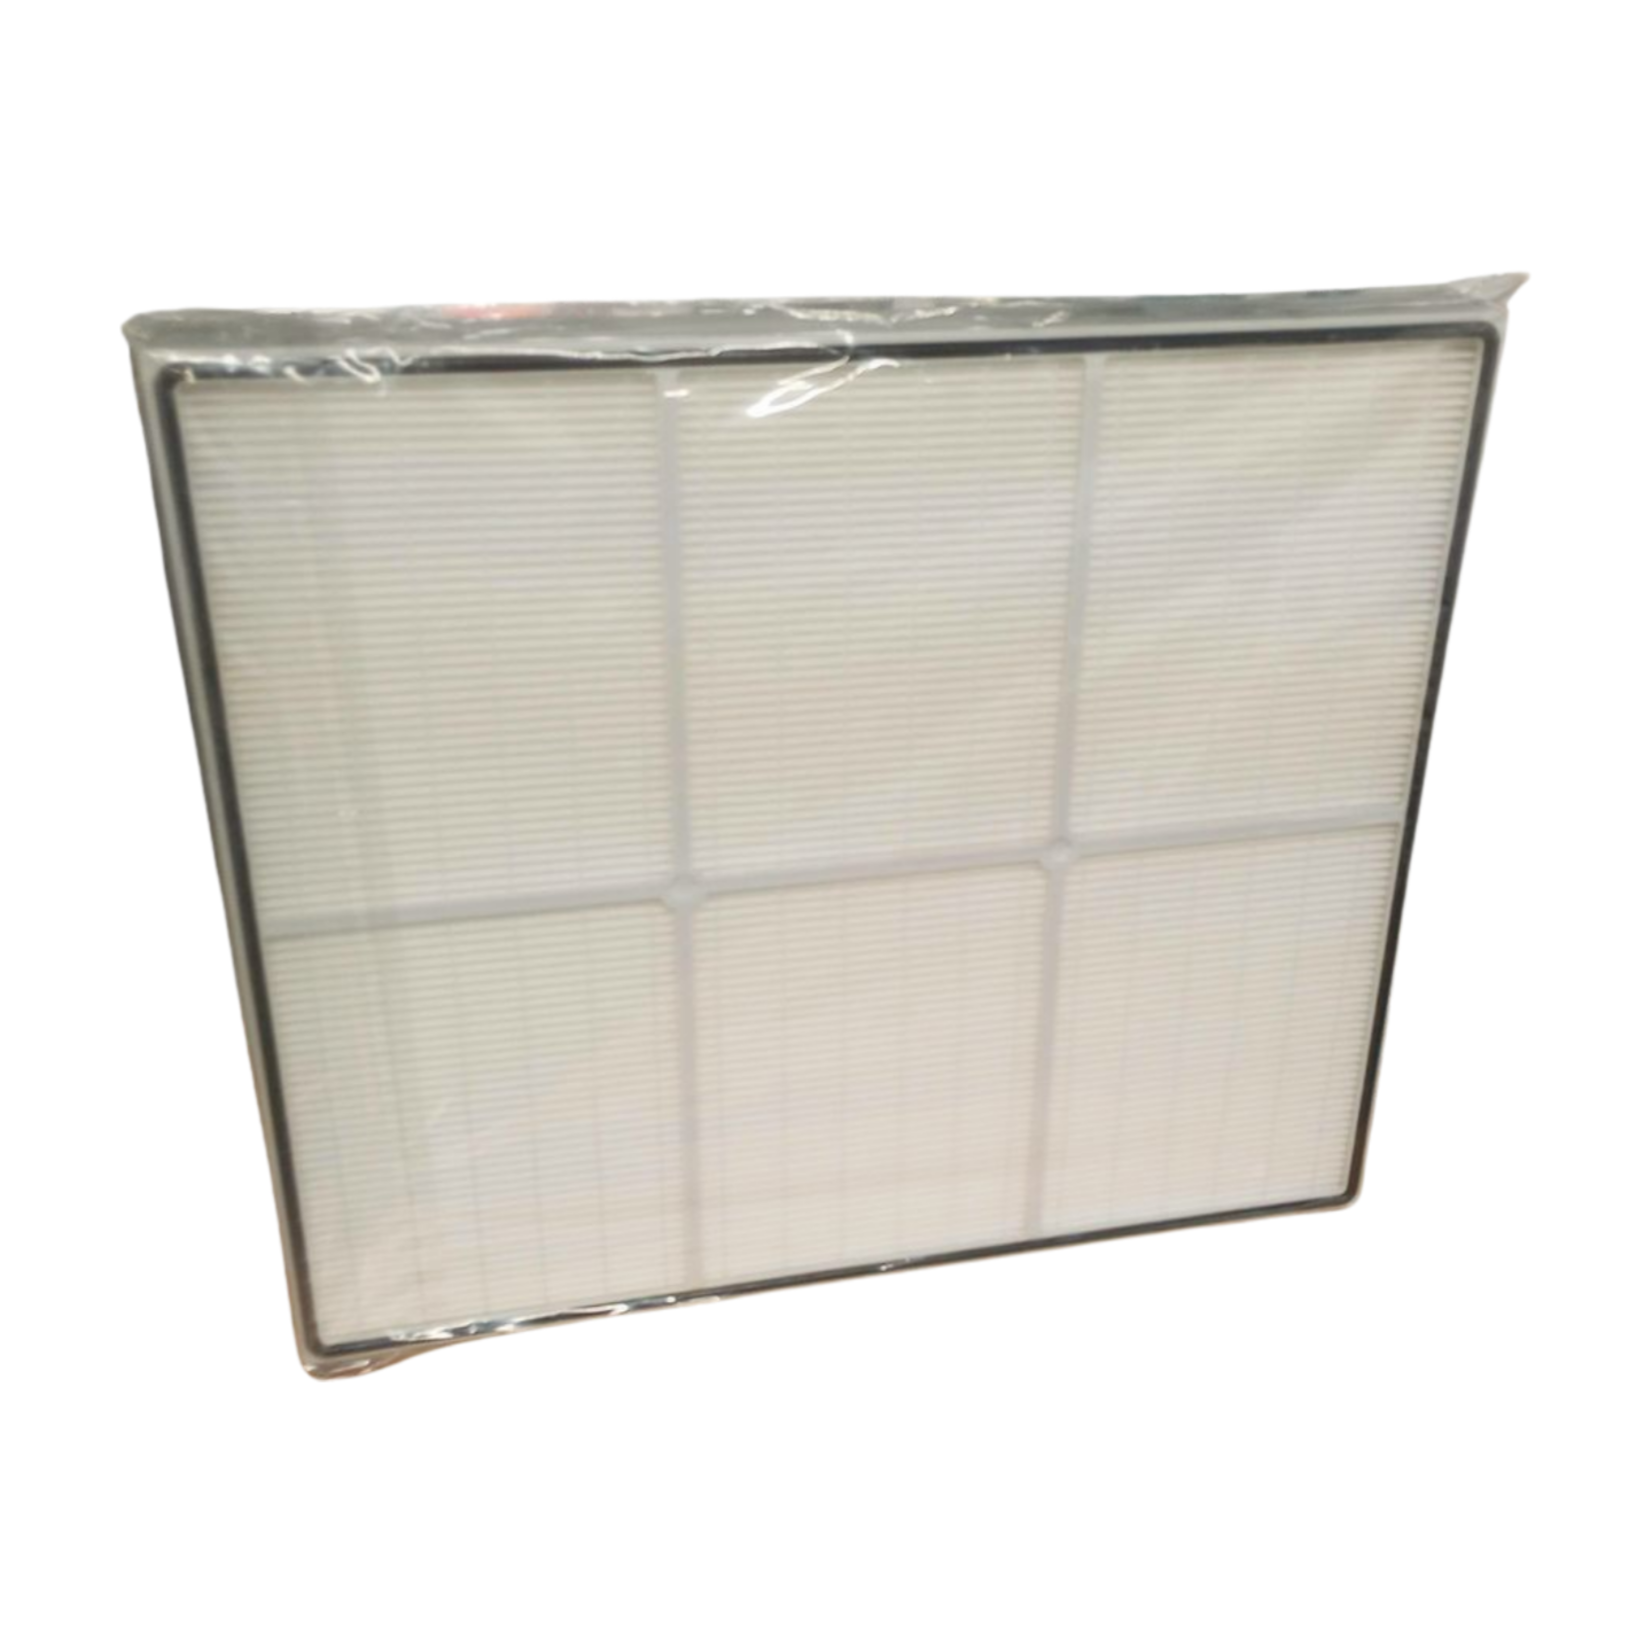 HEPA Filter Pleated H13 16x19x2.5 for Pro-Dri AF500 Air Scrubber